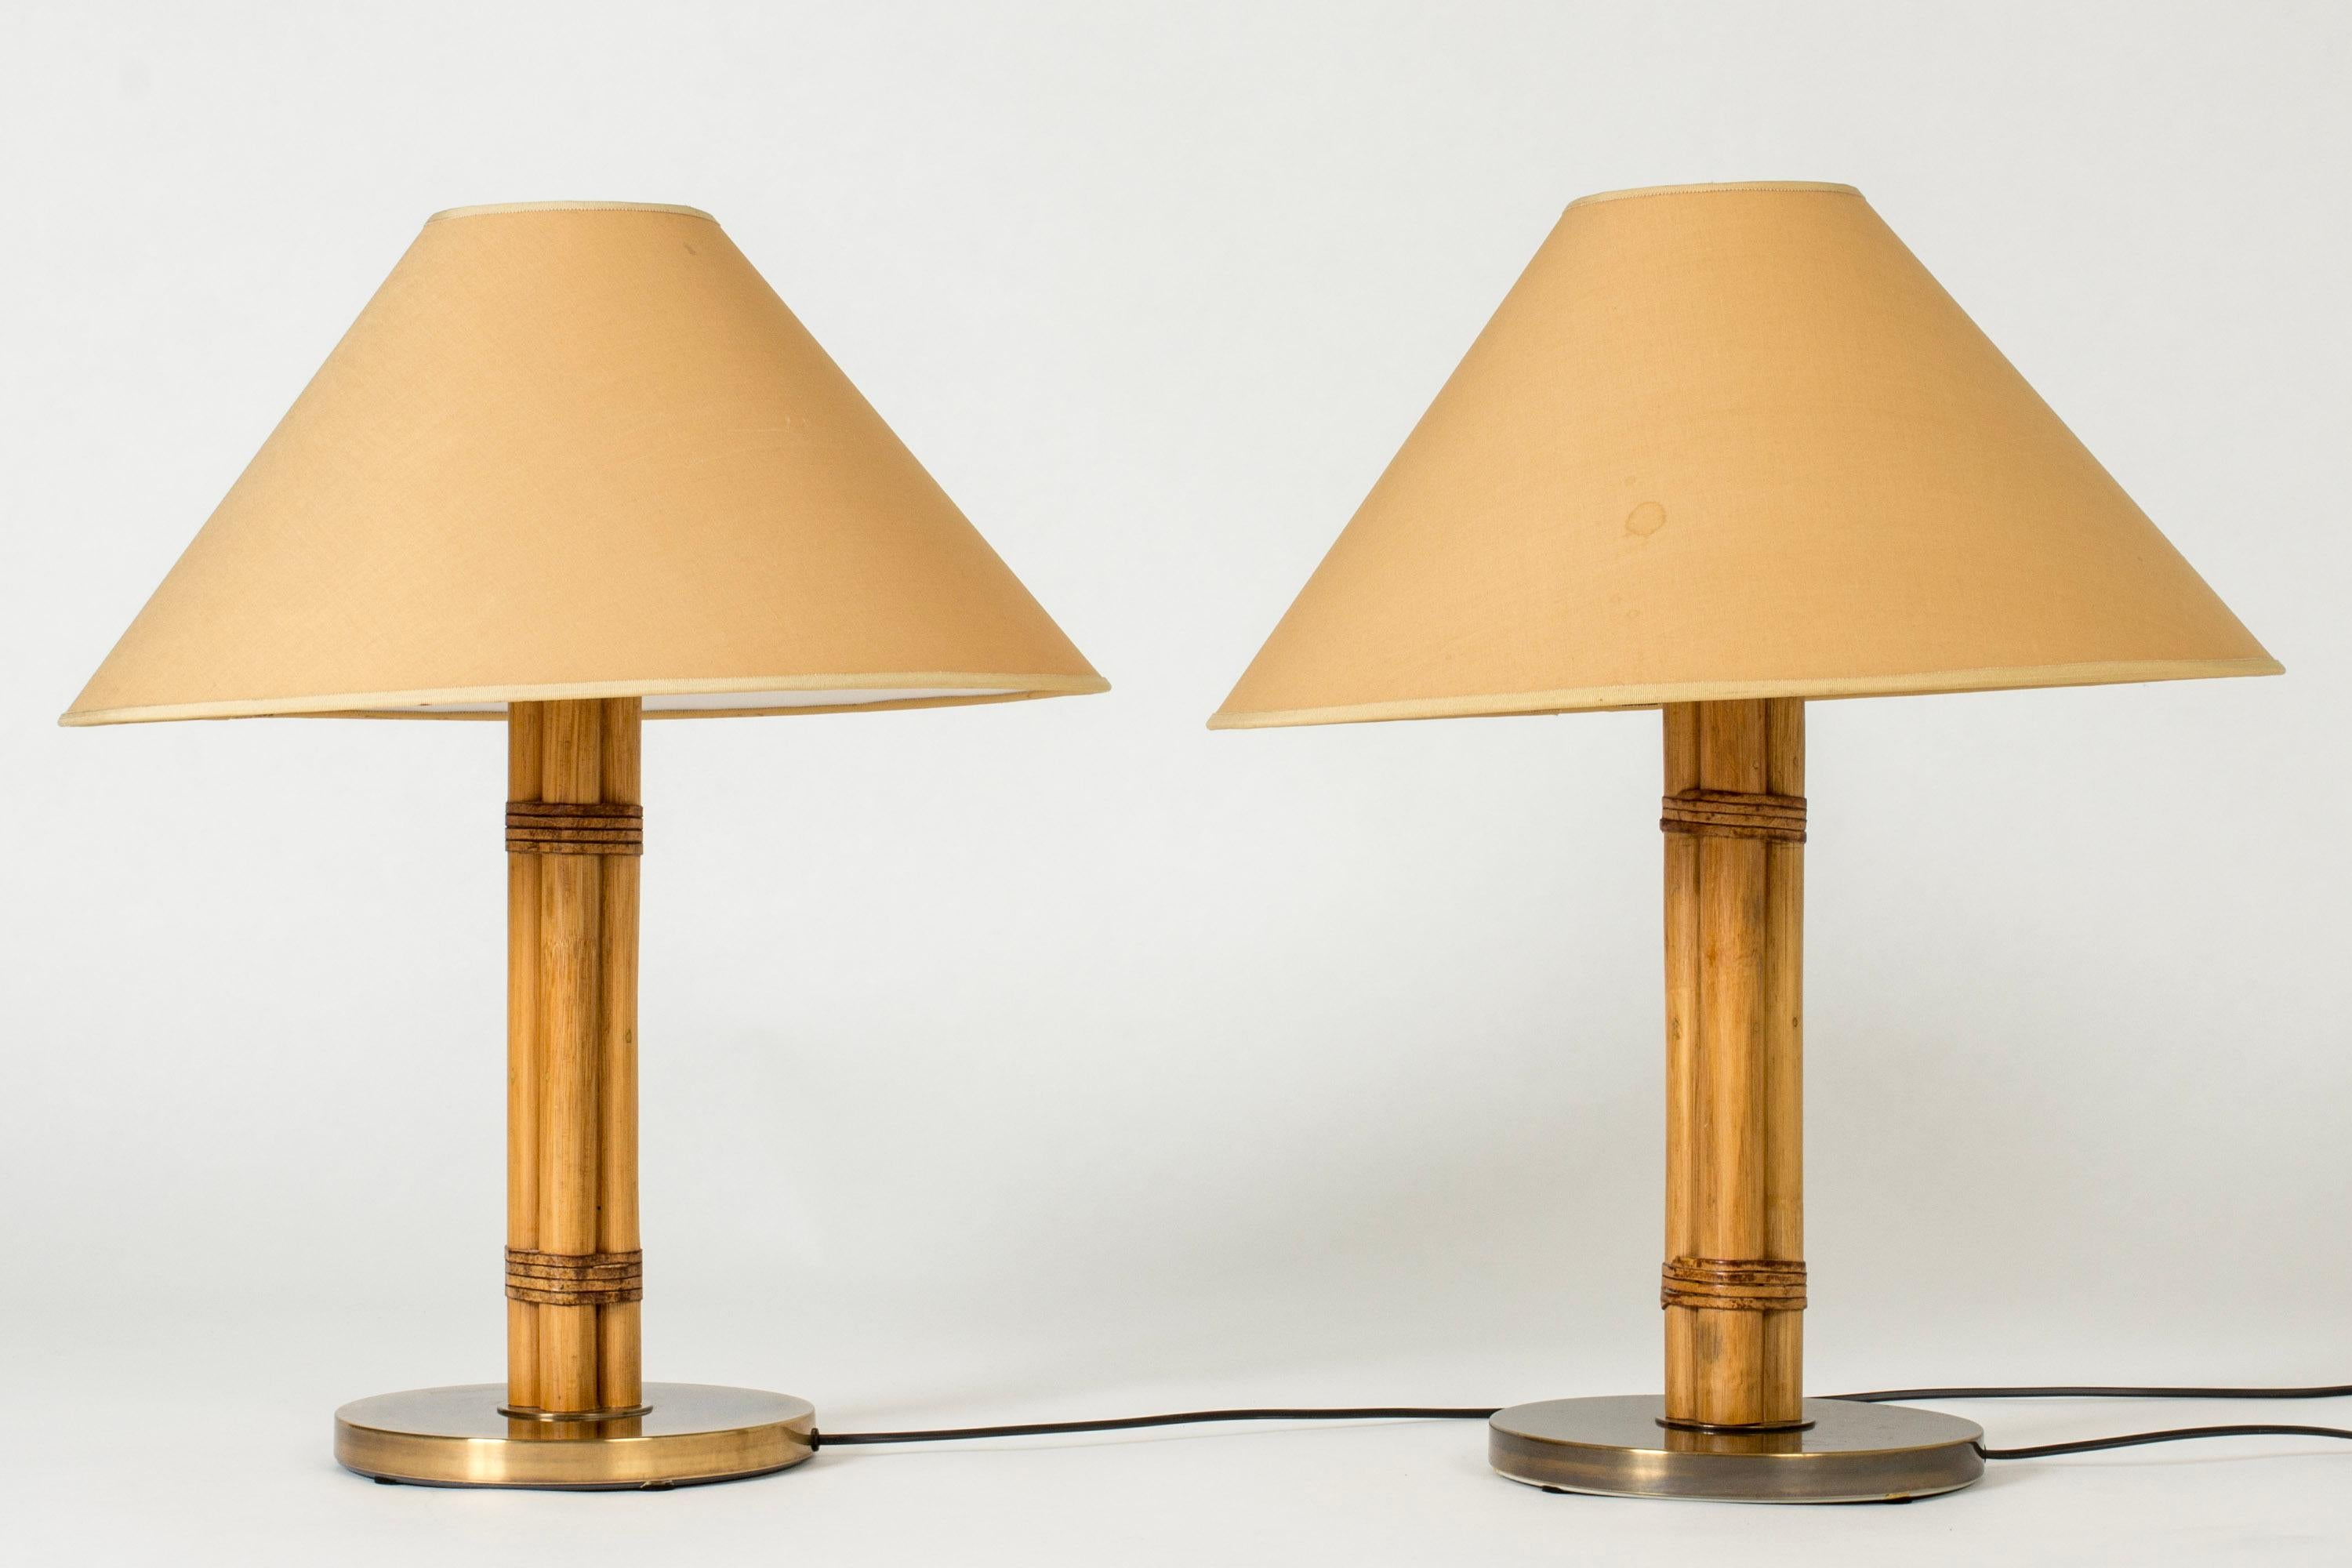 Very cool pair of table lamps from Bergboms, with rustic bamboo stems with leather details. Brass bases and original, wide shades in a terracotta nuance.